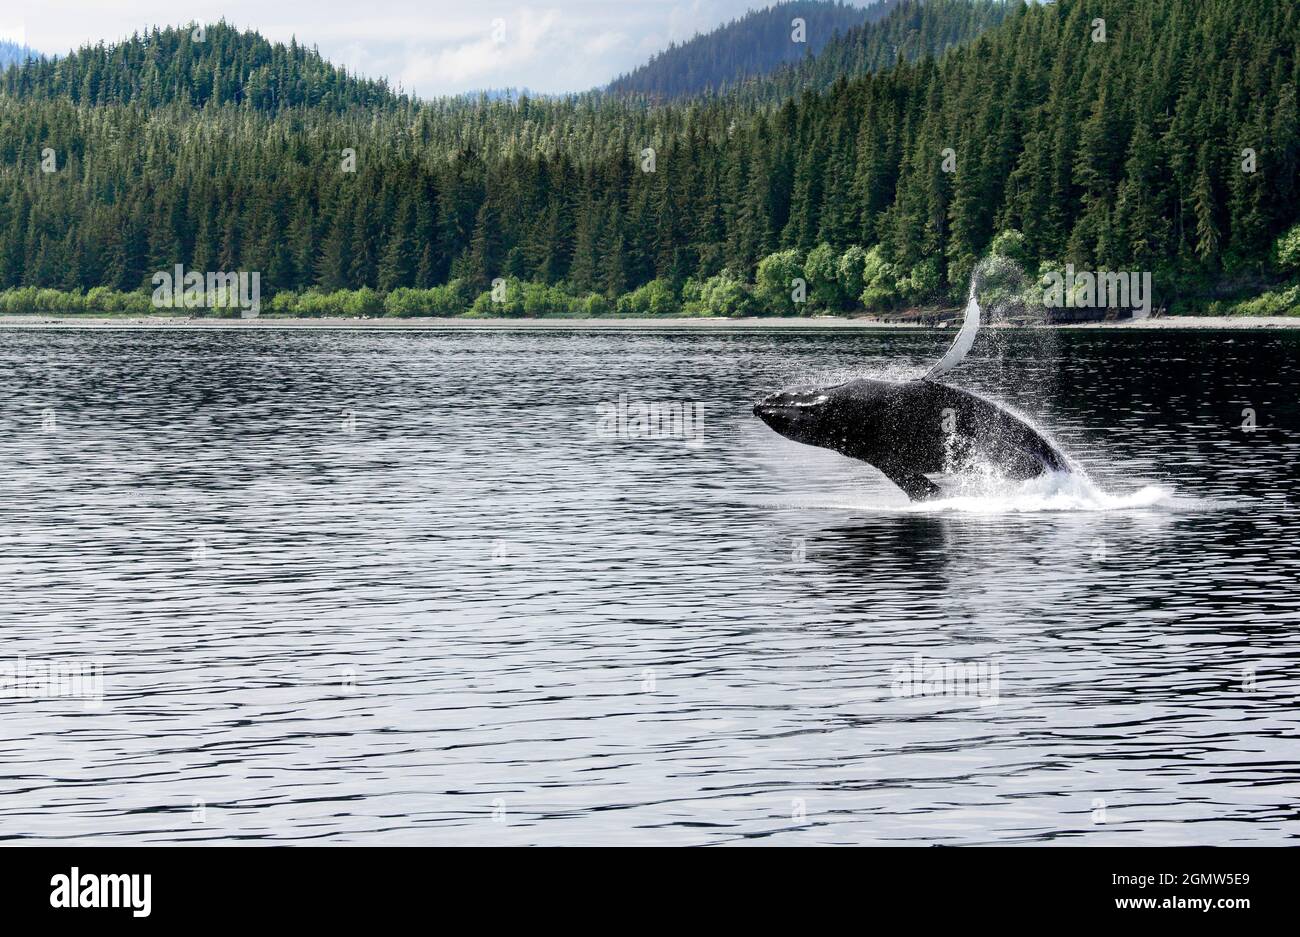 Alaska, USA - 25 May 2010 ; no people in view. Seen from a whale-watching boat, a humpback whale breaches, jumping out of the water at Icy Straits Poi Stock Photo